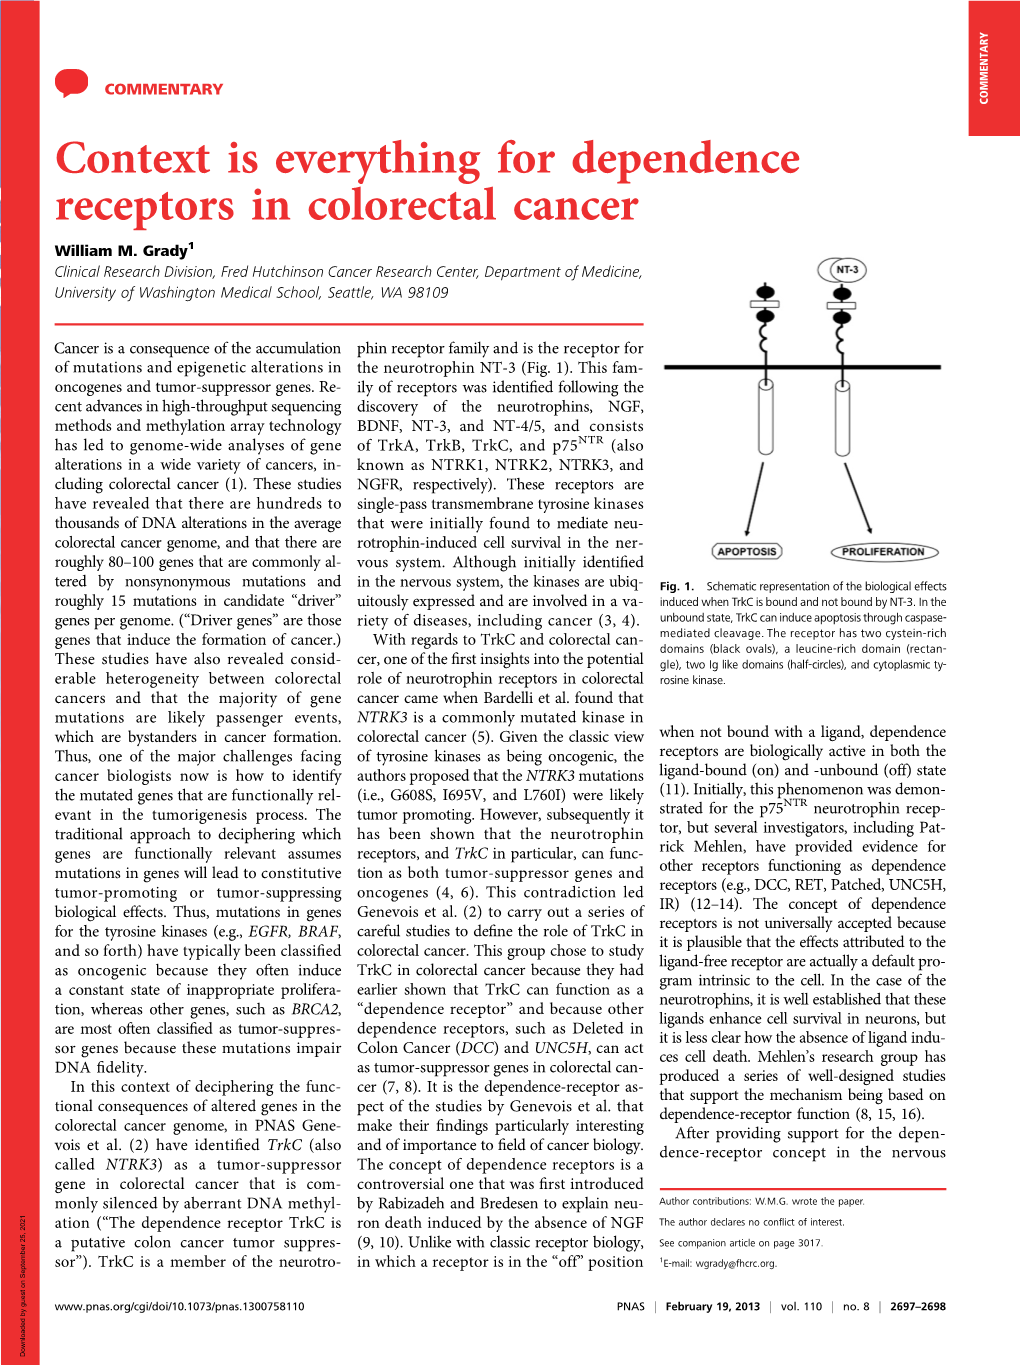 Context Is Everything for Dependence Receptors in Colorectal Cancer William M